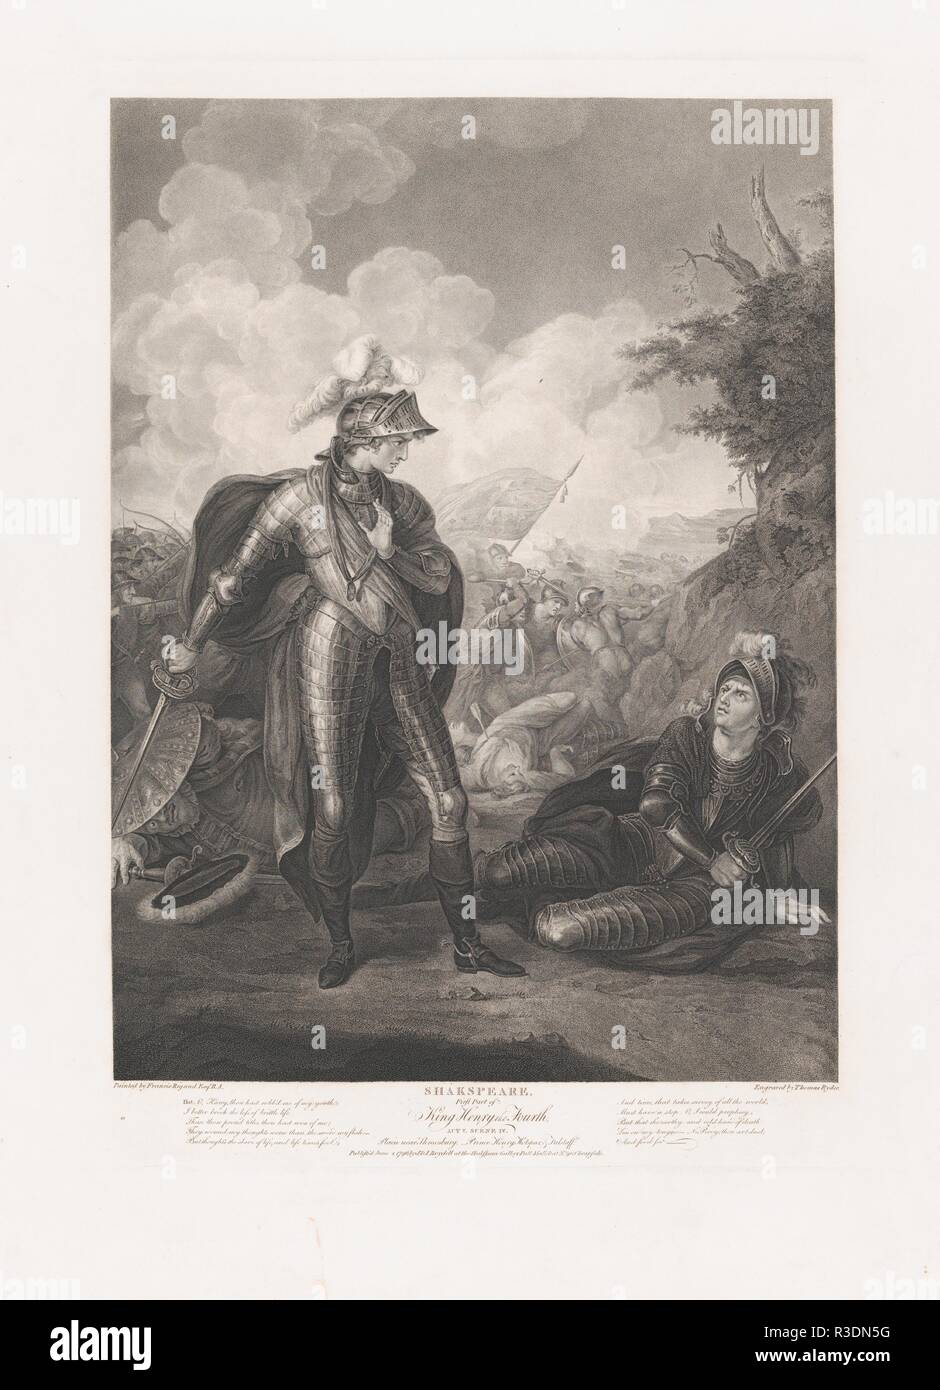 Prince Henry, Hotspur and Falstaff (Shakespeare, King Henry IV, Part 1, Act 5, Scene 4). Artist: After John Francis Rigaud (British (born Italy), Turin 1742-1810 Packington). Dimensions: Plate: 22 7/16 × 16 5/8 in. (57 × 42.3 cm)  Sheet: 27 5/8 × 21 7/8 in. (70.2 × 55.5 cm). Engraver: Thomas Ryder I (British, 1746-1810). Publisher: John & Josiah Boydell (British, 1786-1804). Series/Portfolio: Boydell's Shakespeare Gallery. Subject: William Shakespeare (British, Stratford-upon-Avon 1564-1616 Stratford-upon-Avon). Date: 1796. Museum: Metropolitan Museum of Art, New York, USA. Stock Photo